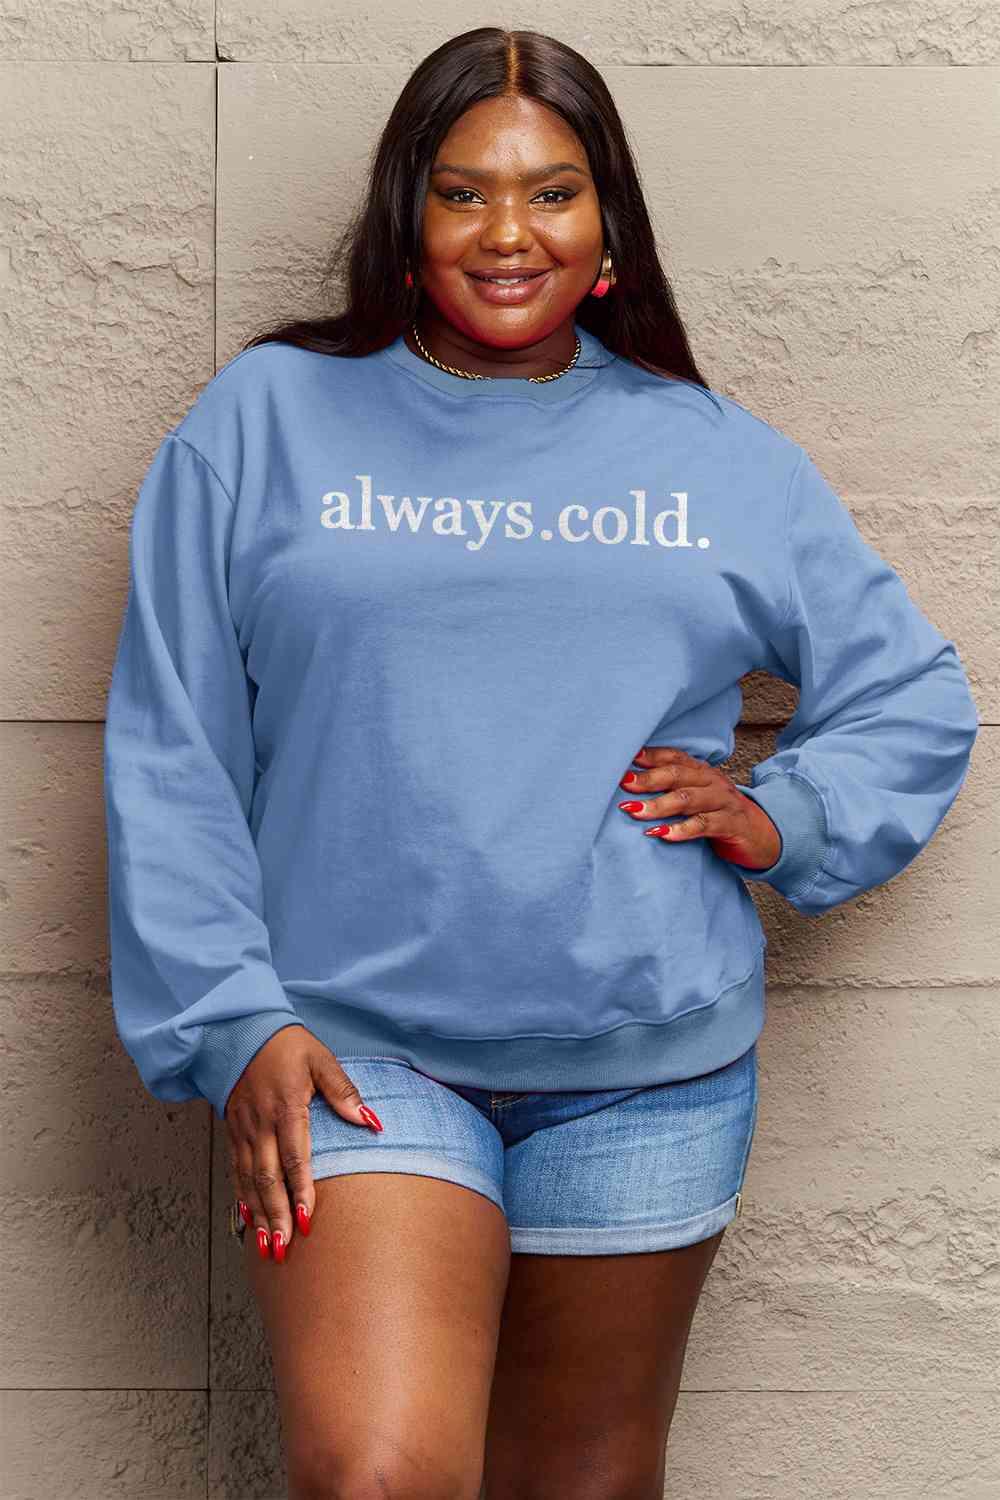 Simply Love Full Size ALWAYS.COLD. Graphic Sweatshirt - Ash Boutique